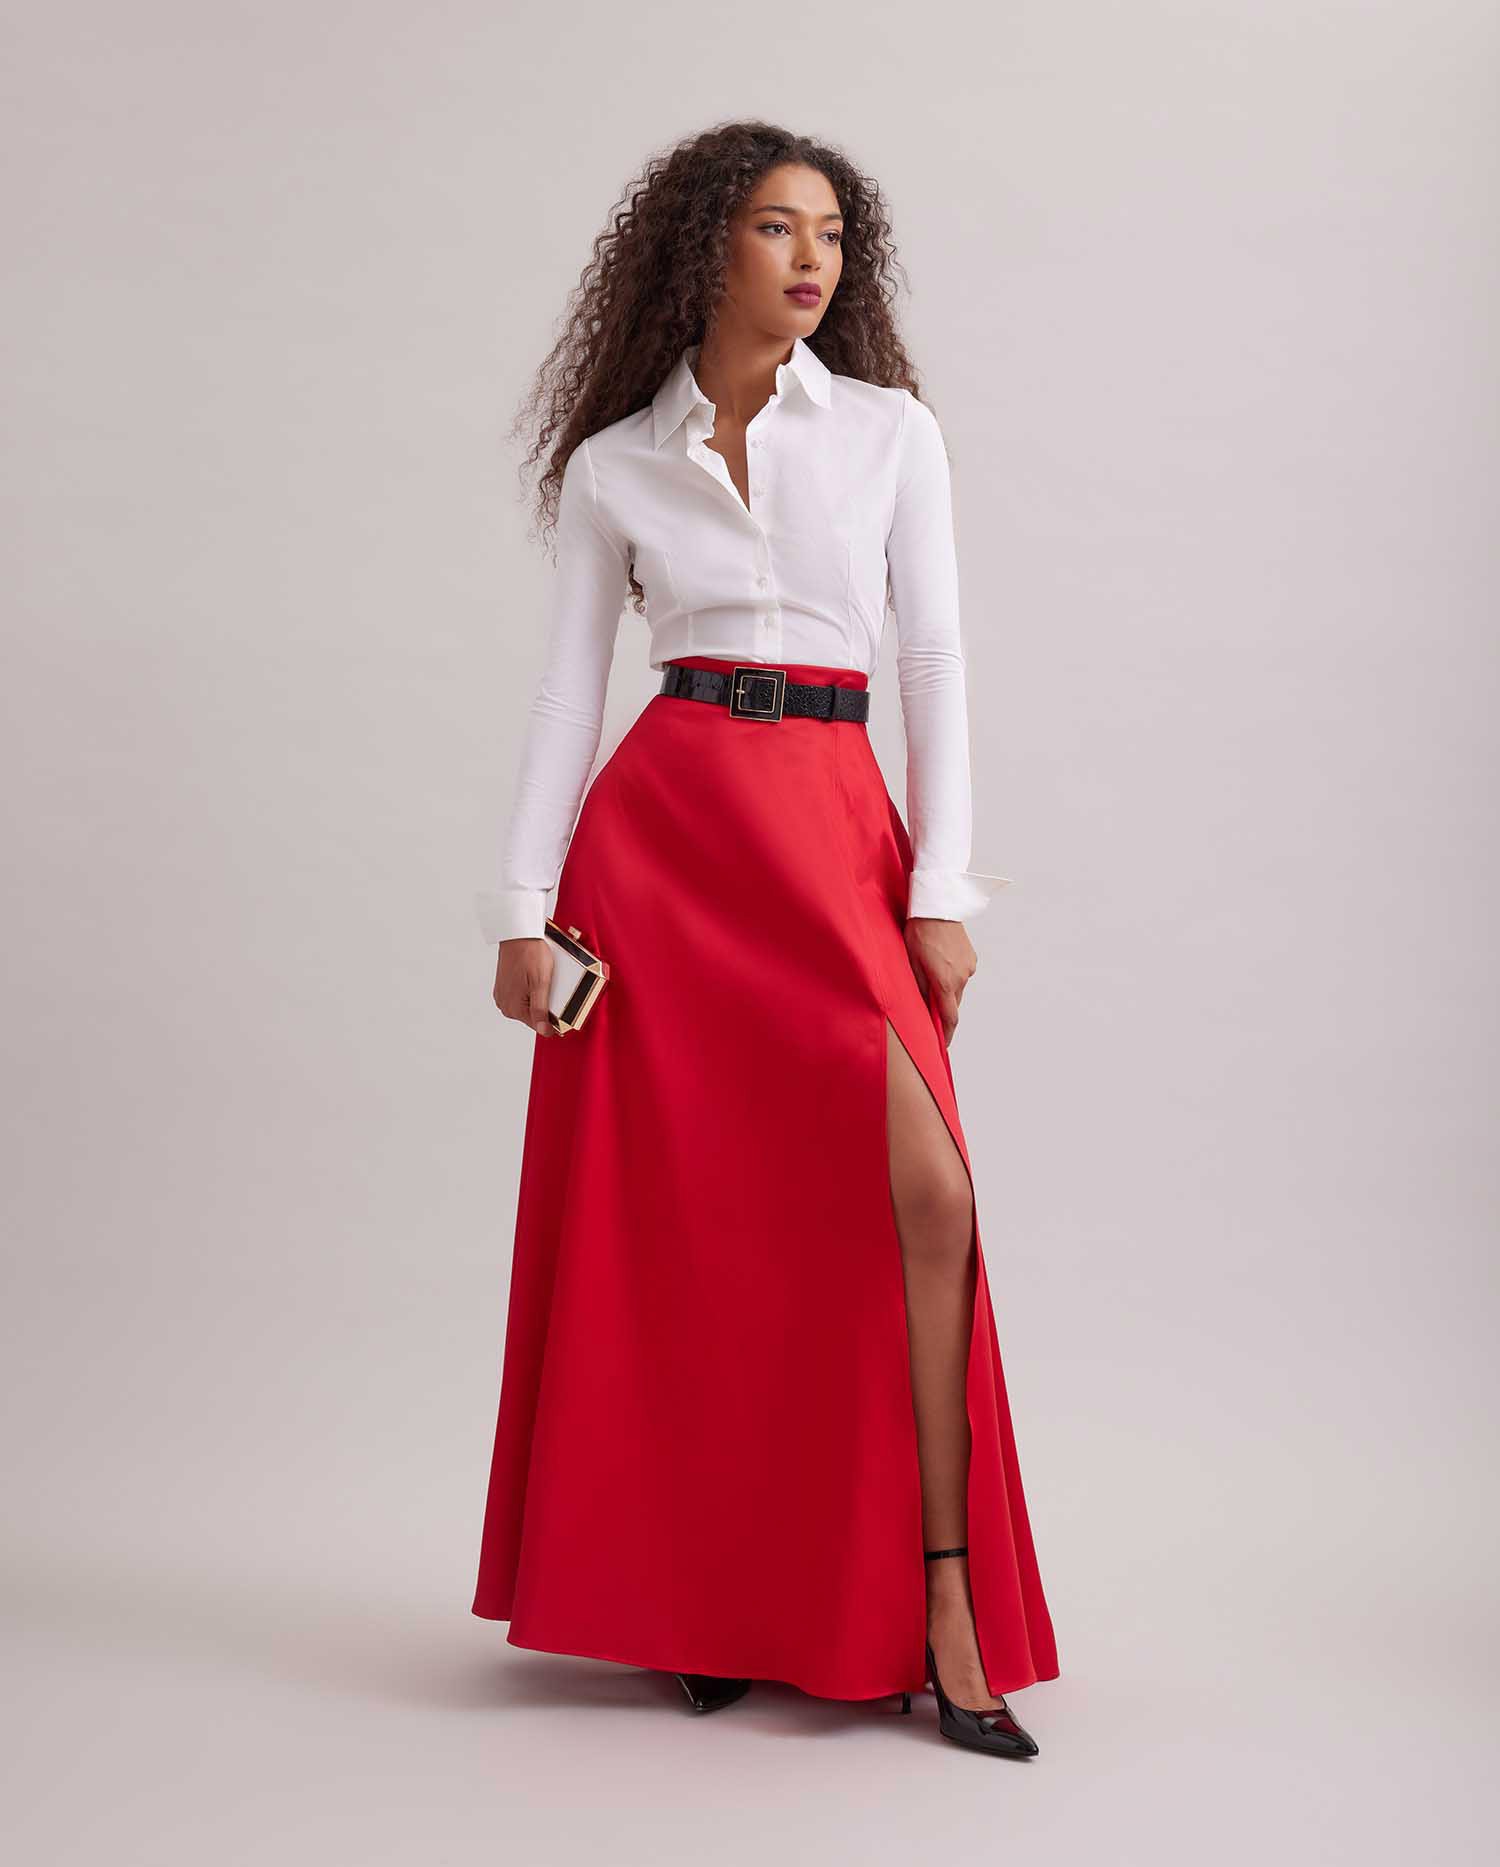 Discover the JOYCE red satin skirt from ANNE FONTAINE